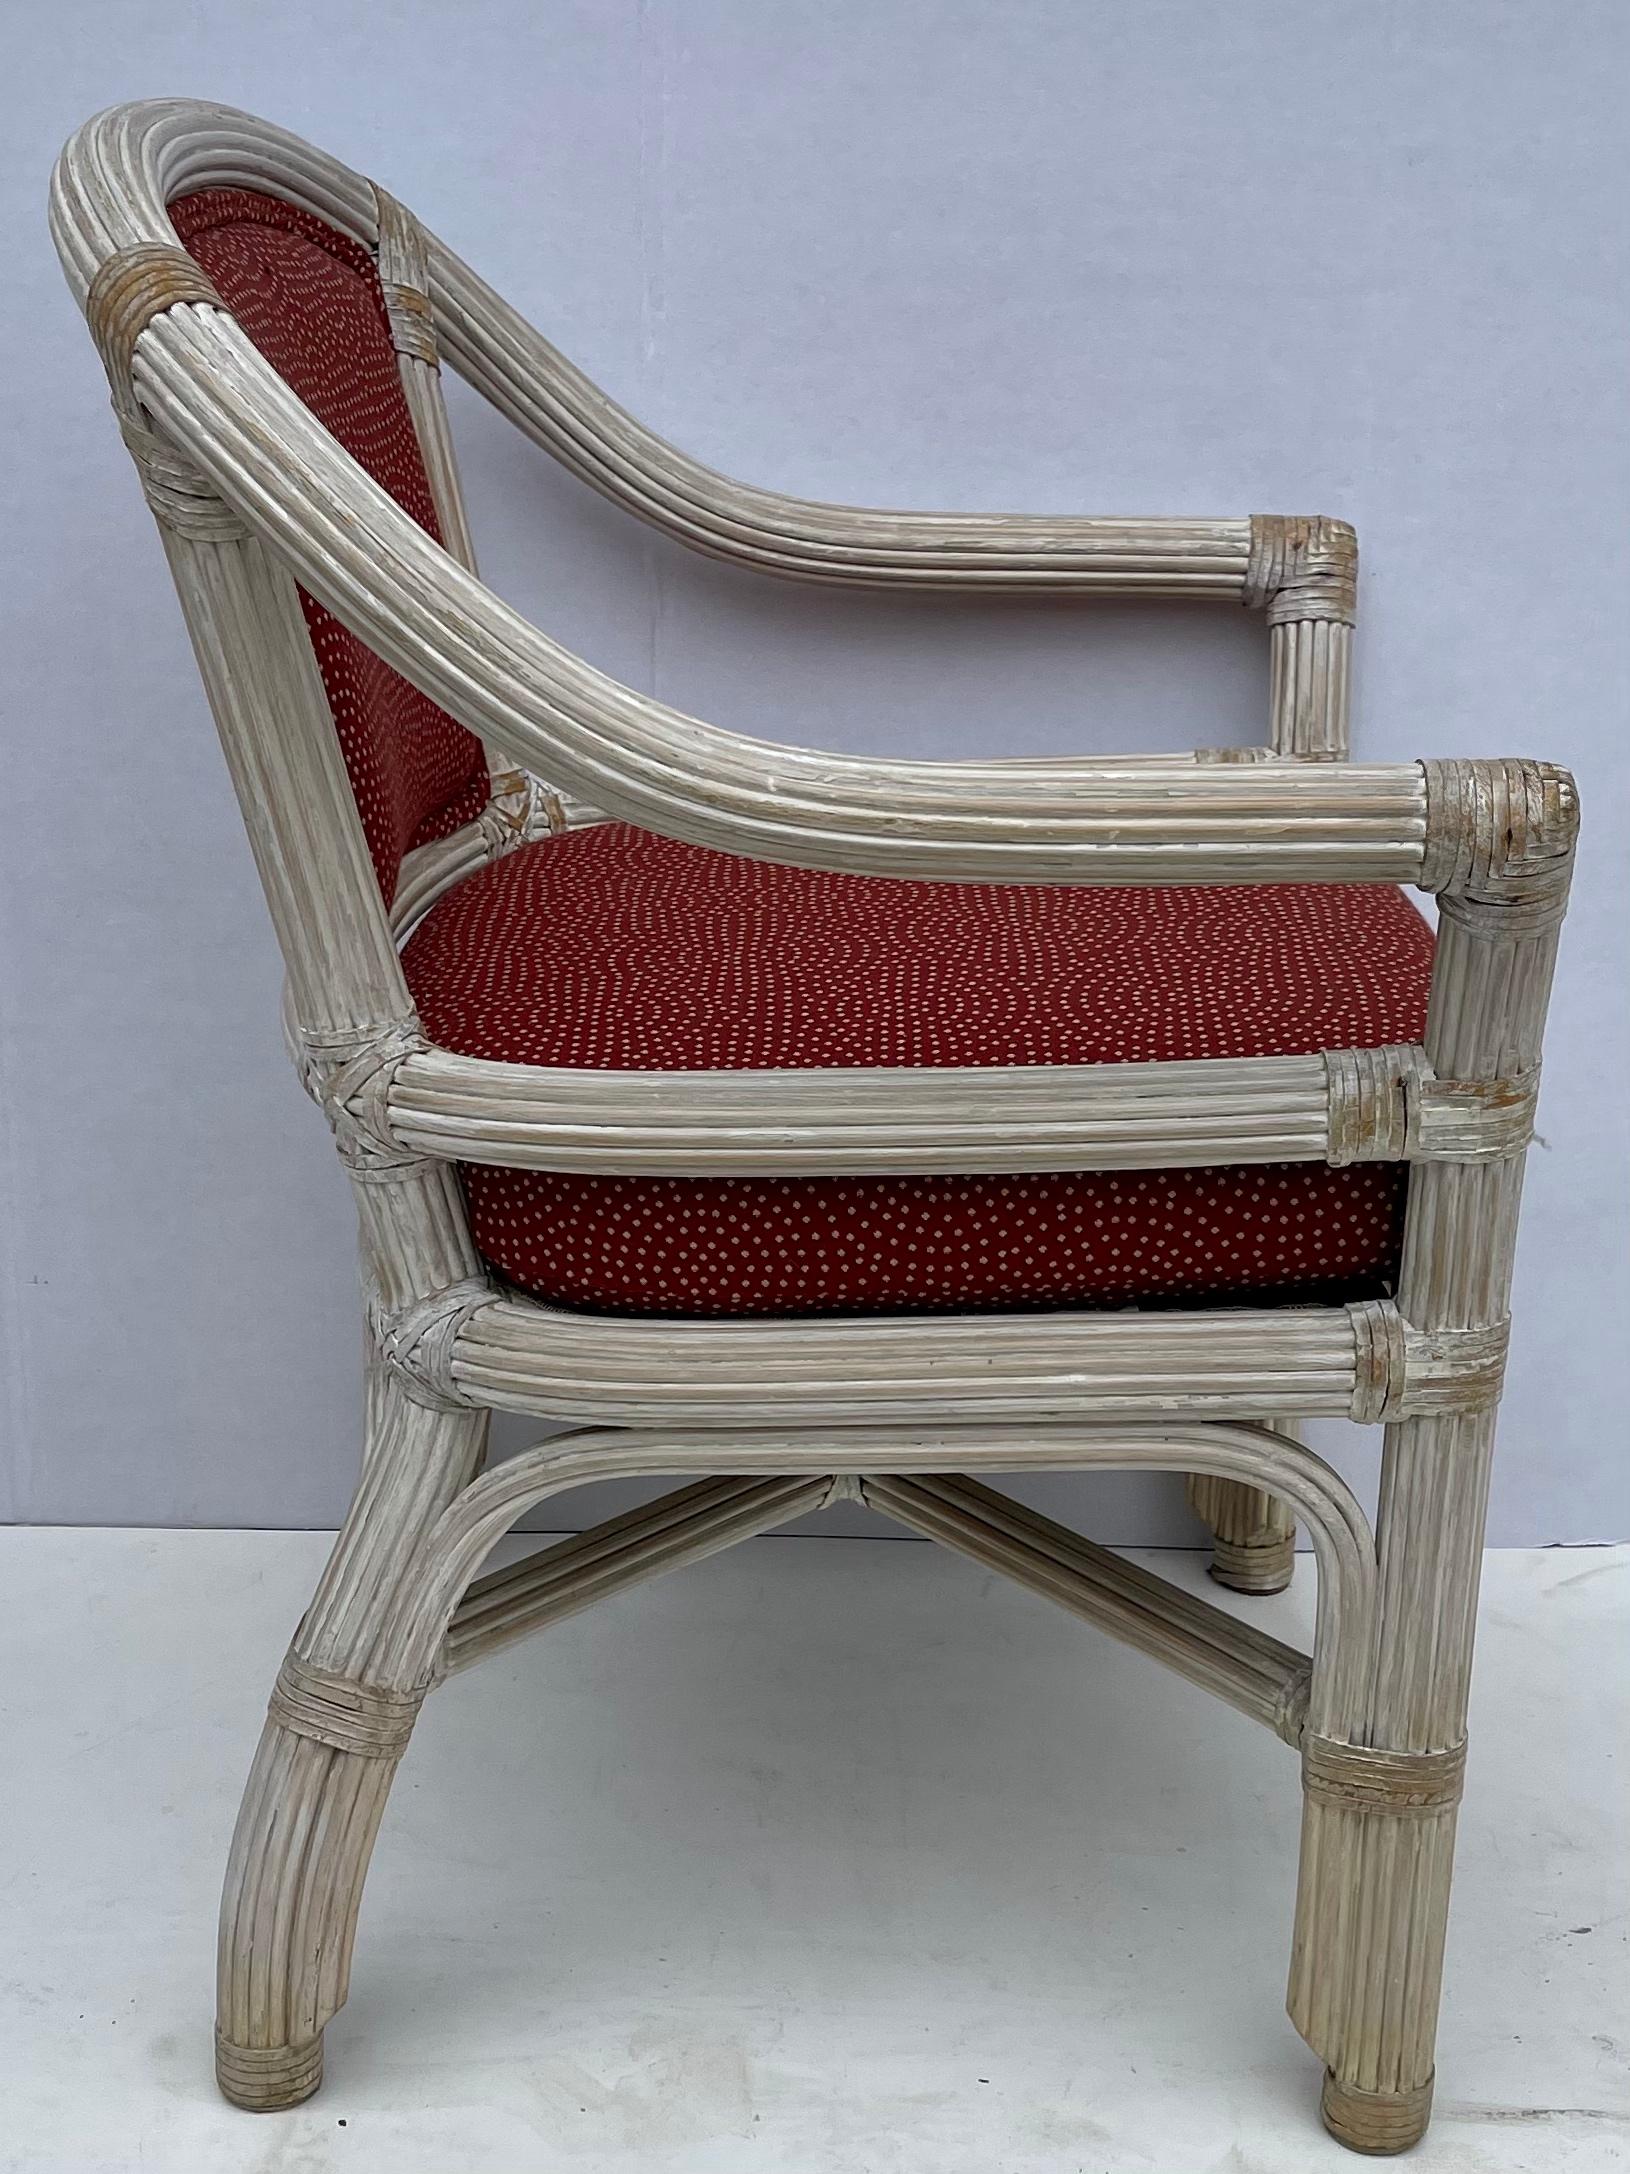 20th Century 1970s Cerused Reeded Pencil Bamboo Chairs By Henry Link - S/4 For Sale